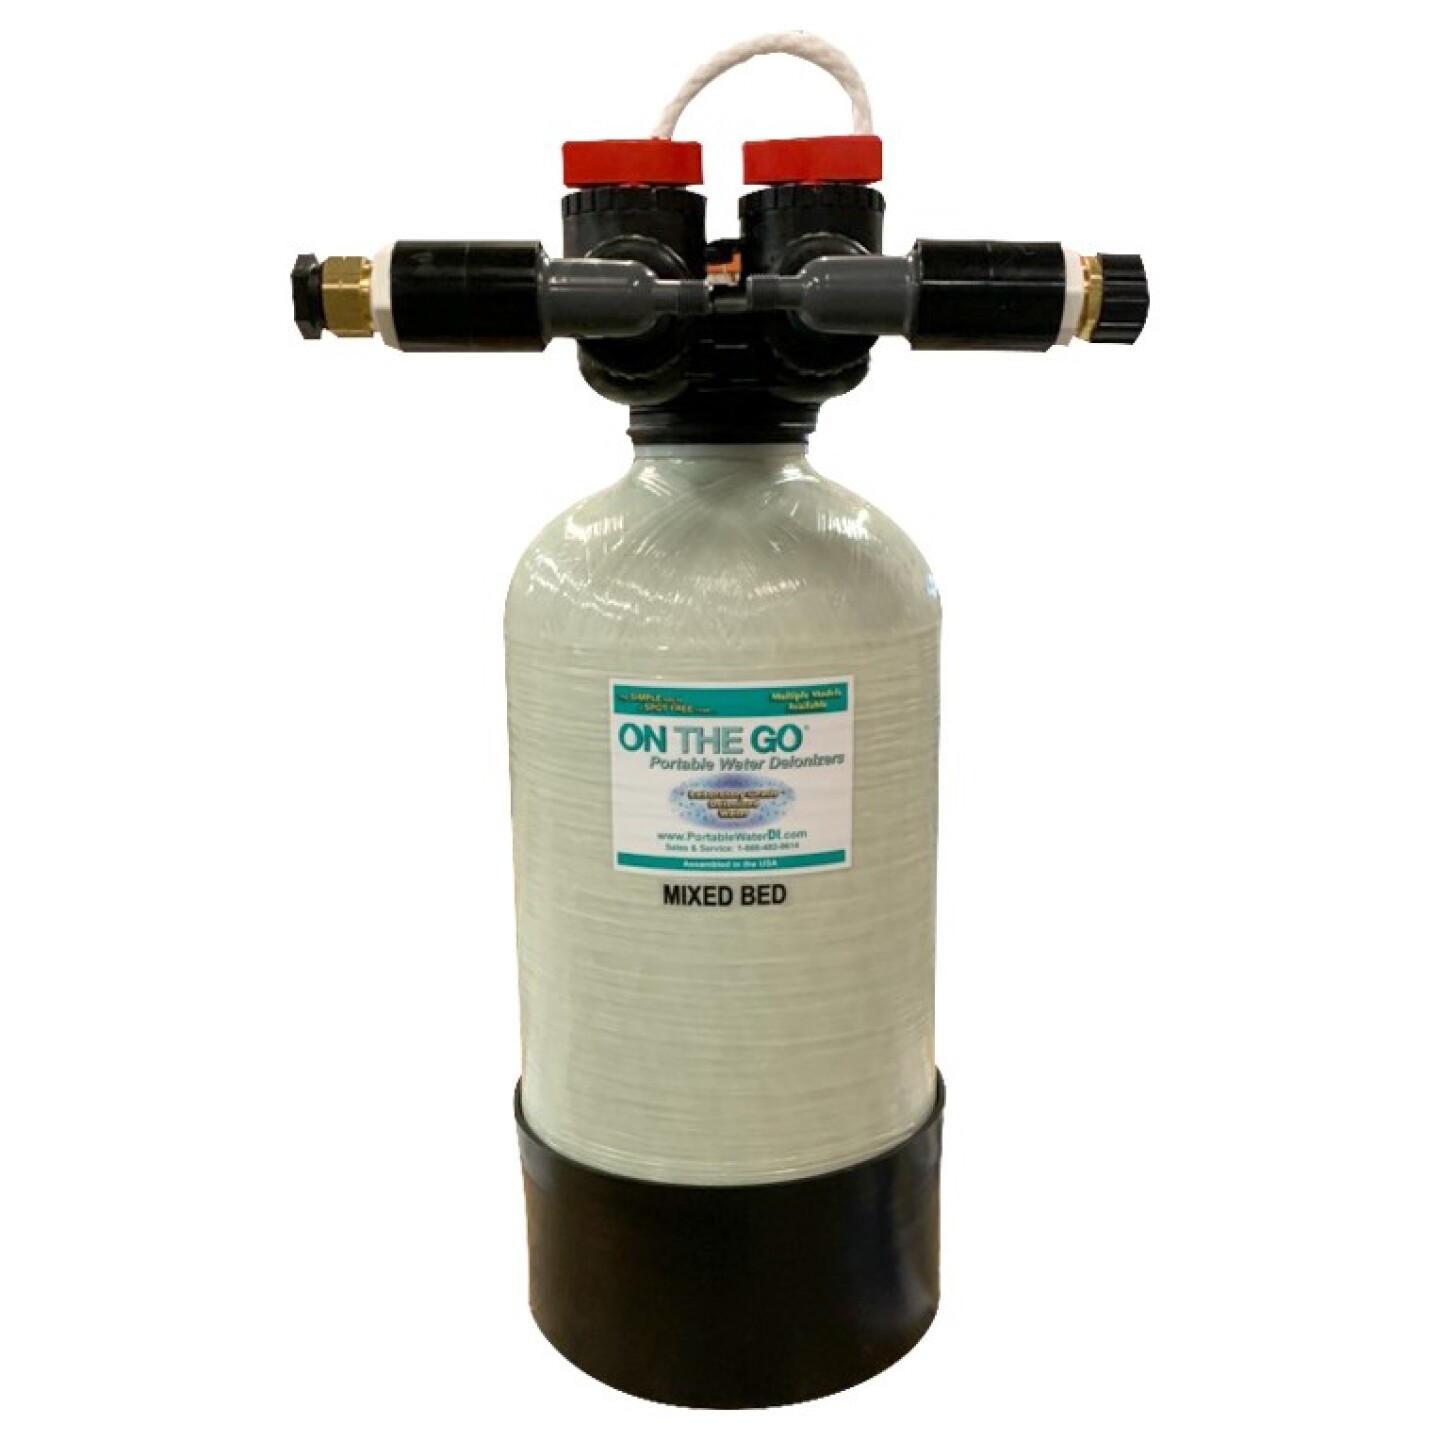 Portable Double Standard Water Softener - On The Go - Portable Water  Softener